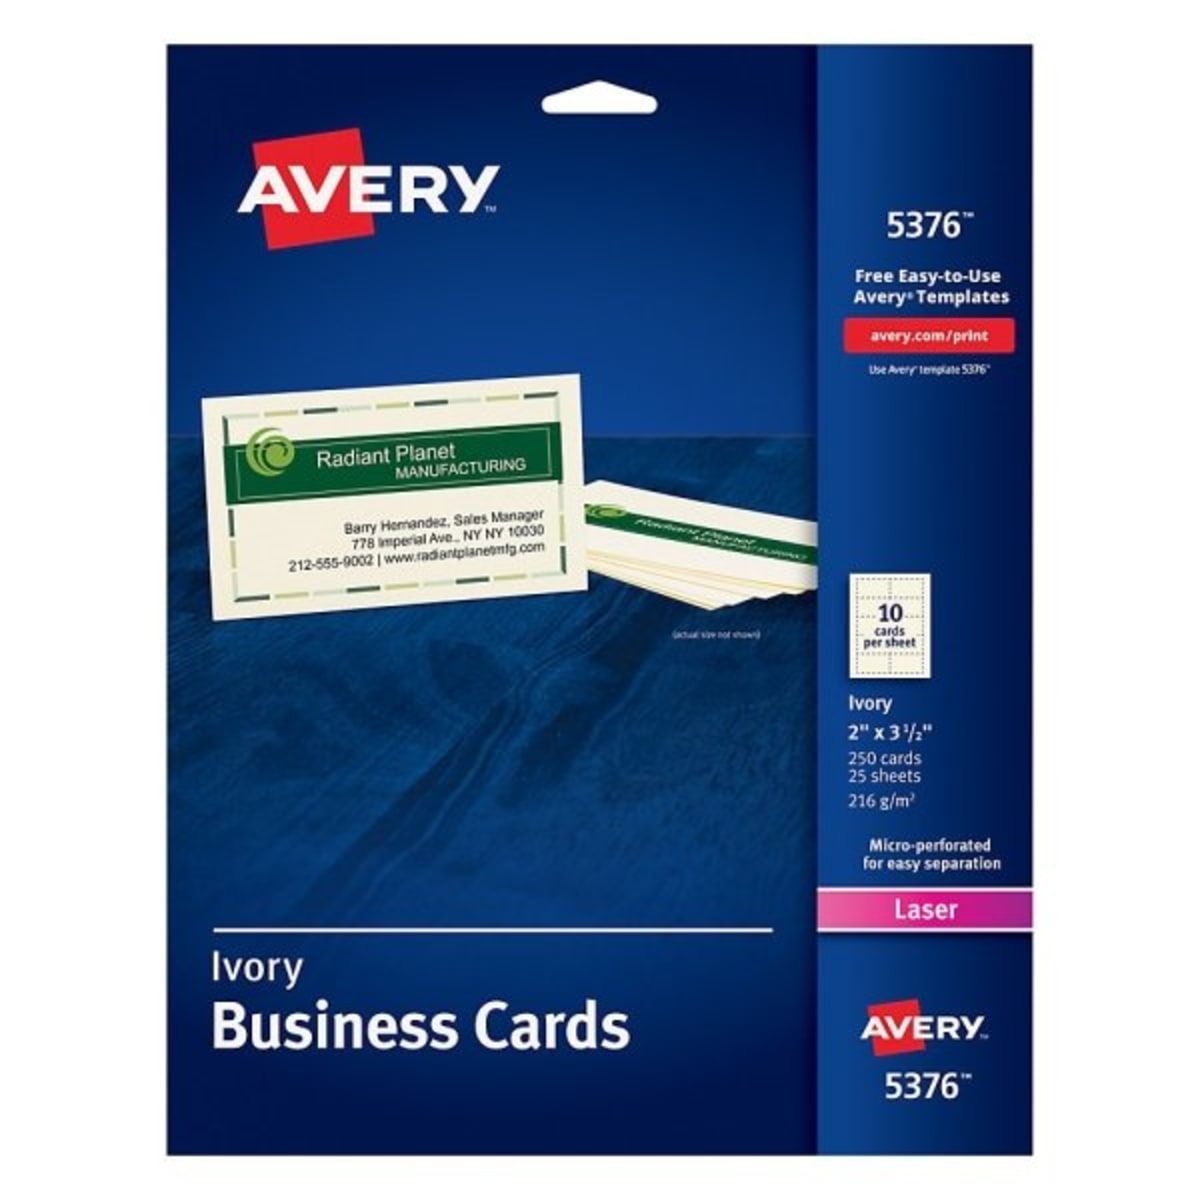 41-business-cards-avery-template-pictures